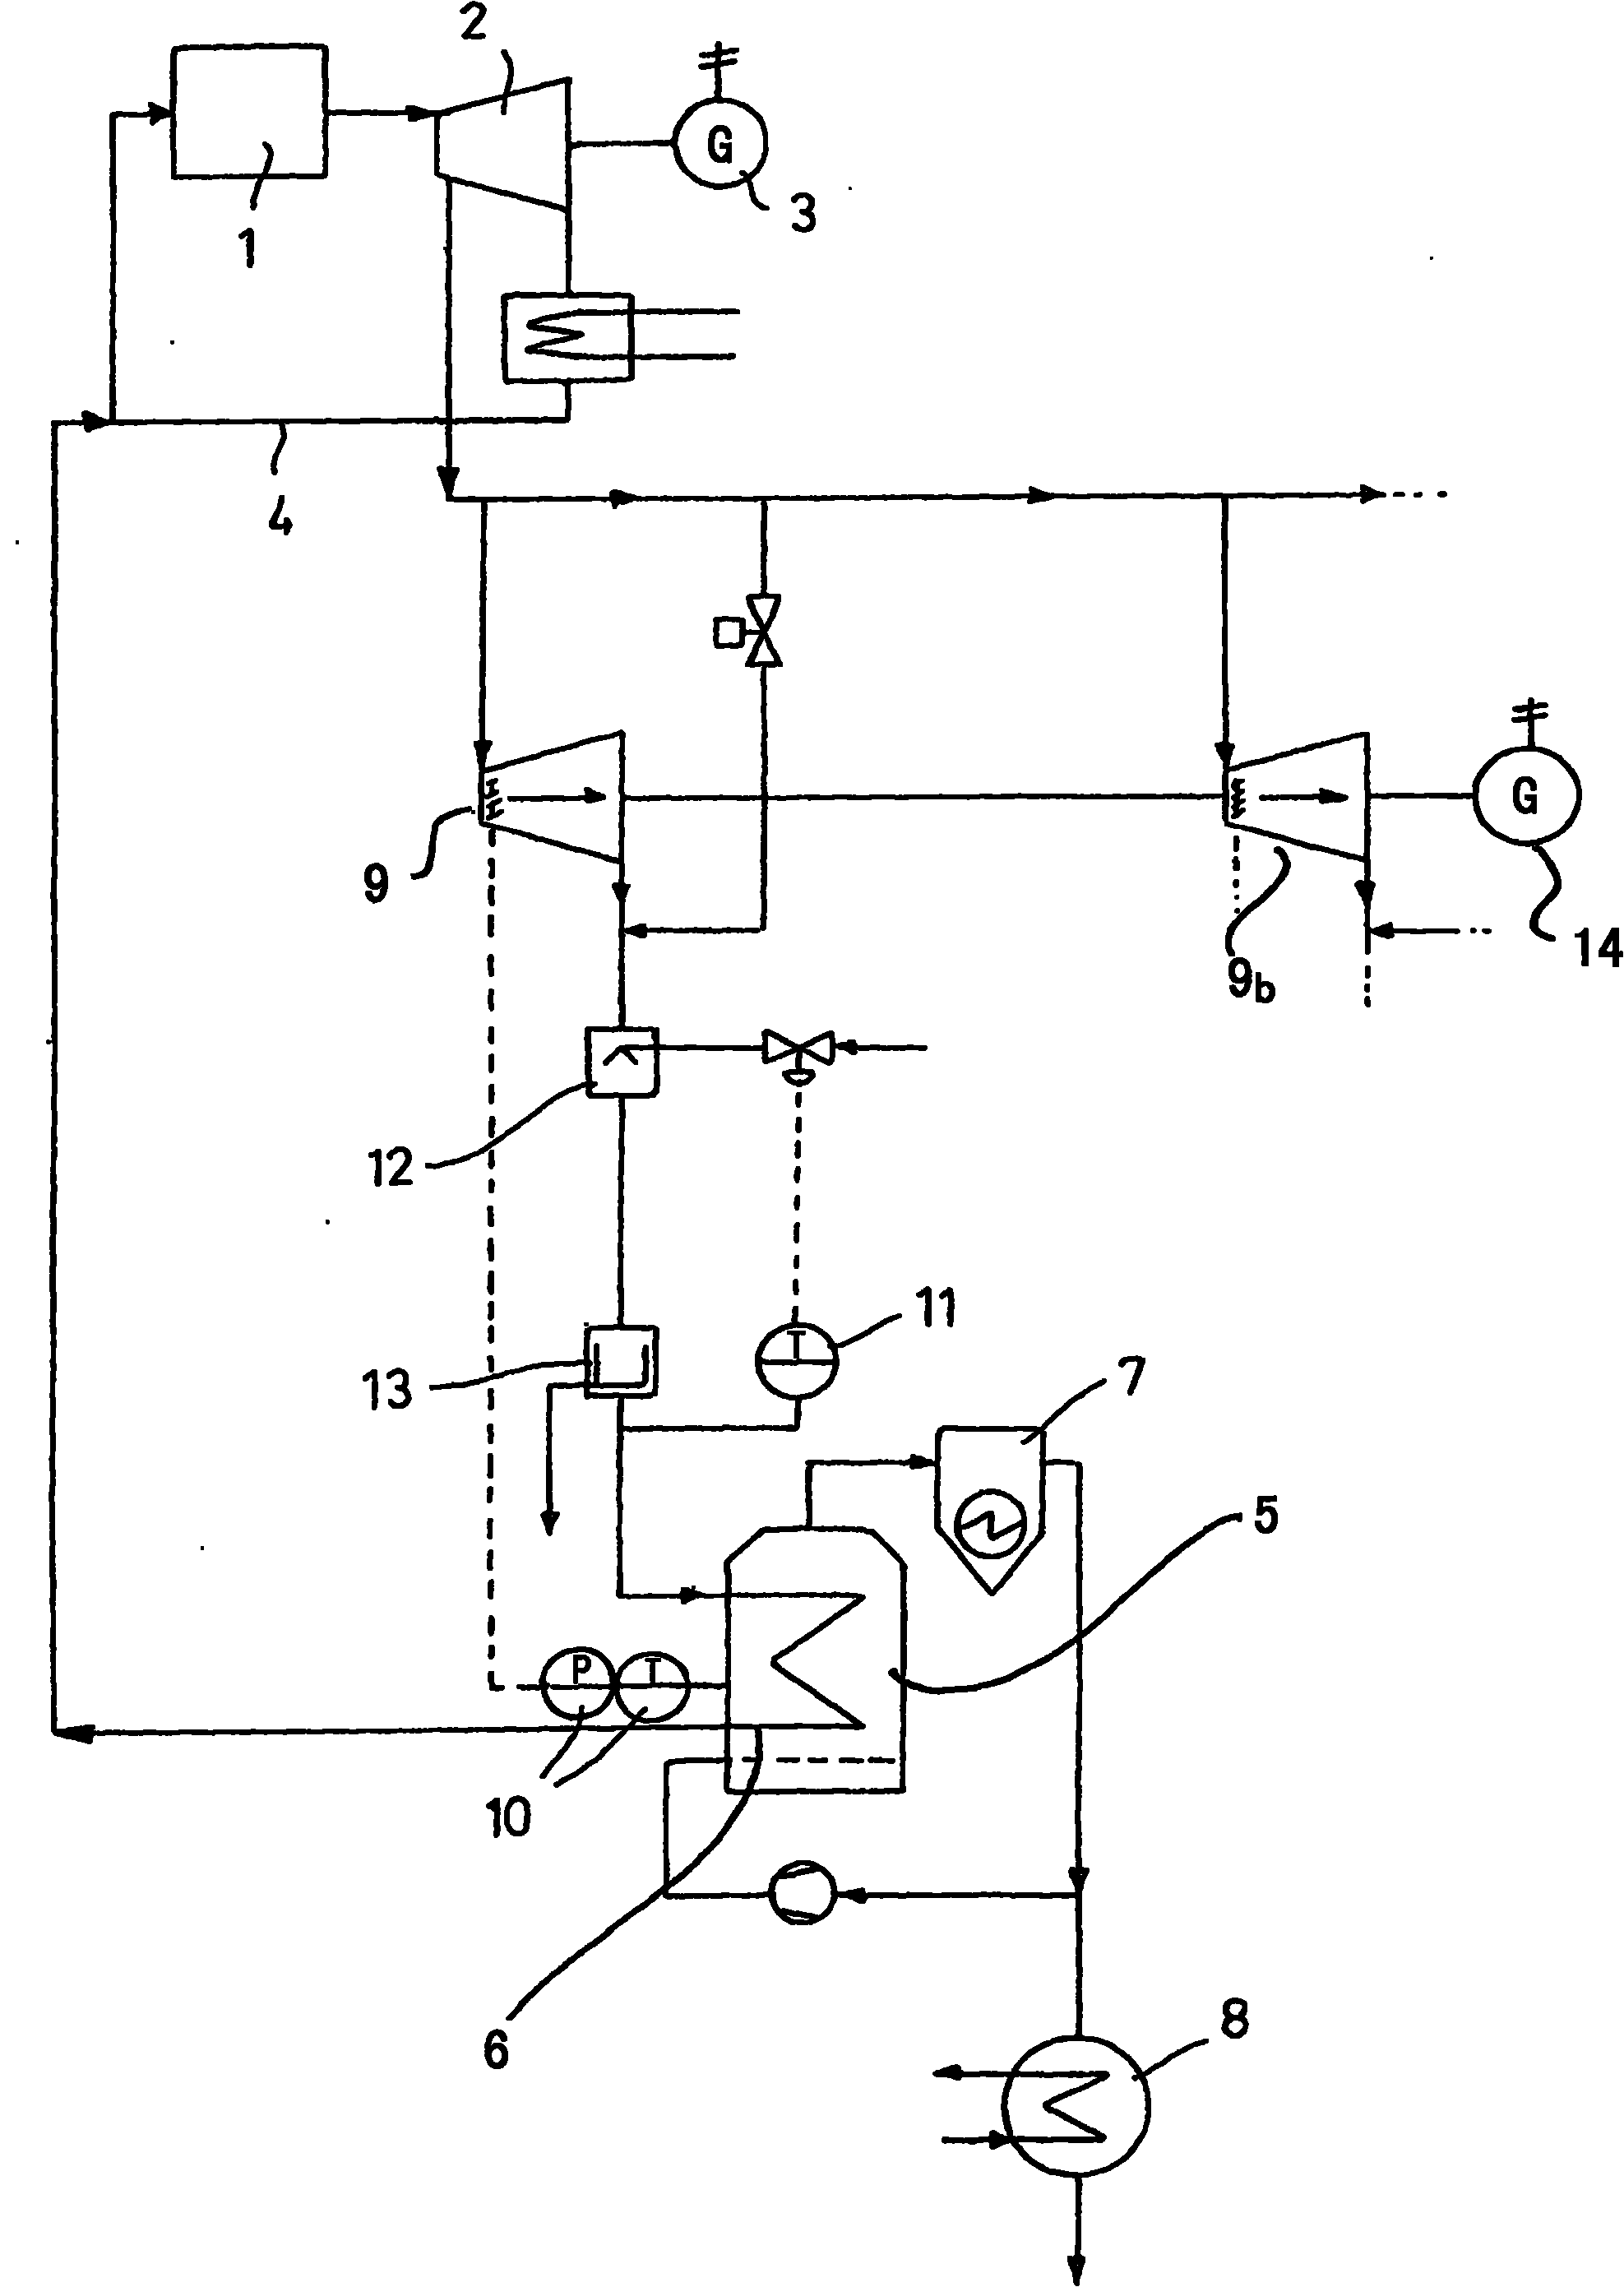 Method for operating a steam turbine power plant and also device for generating steam